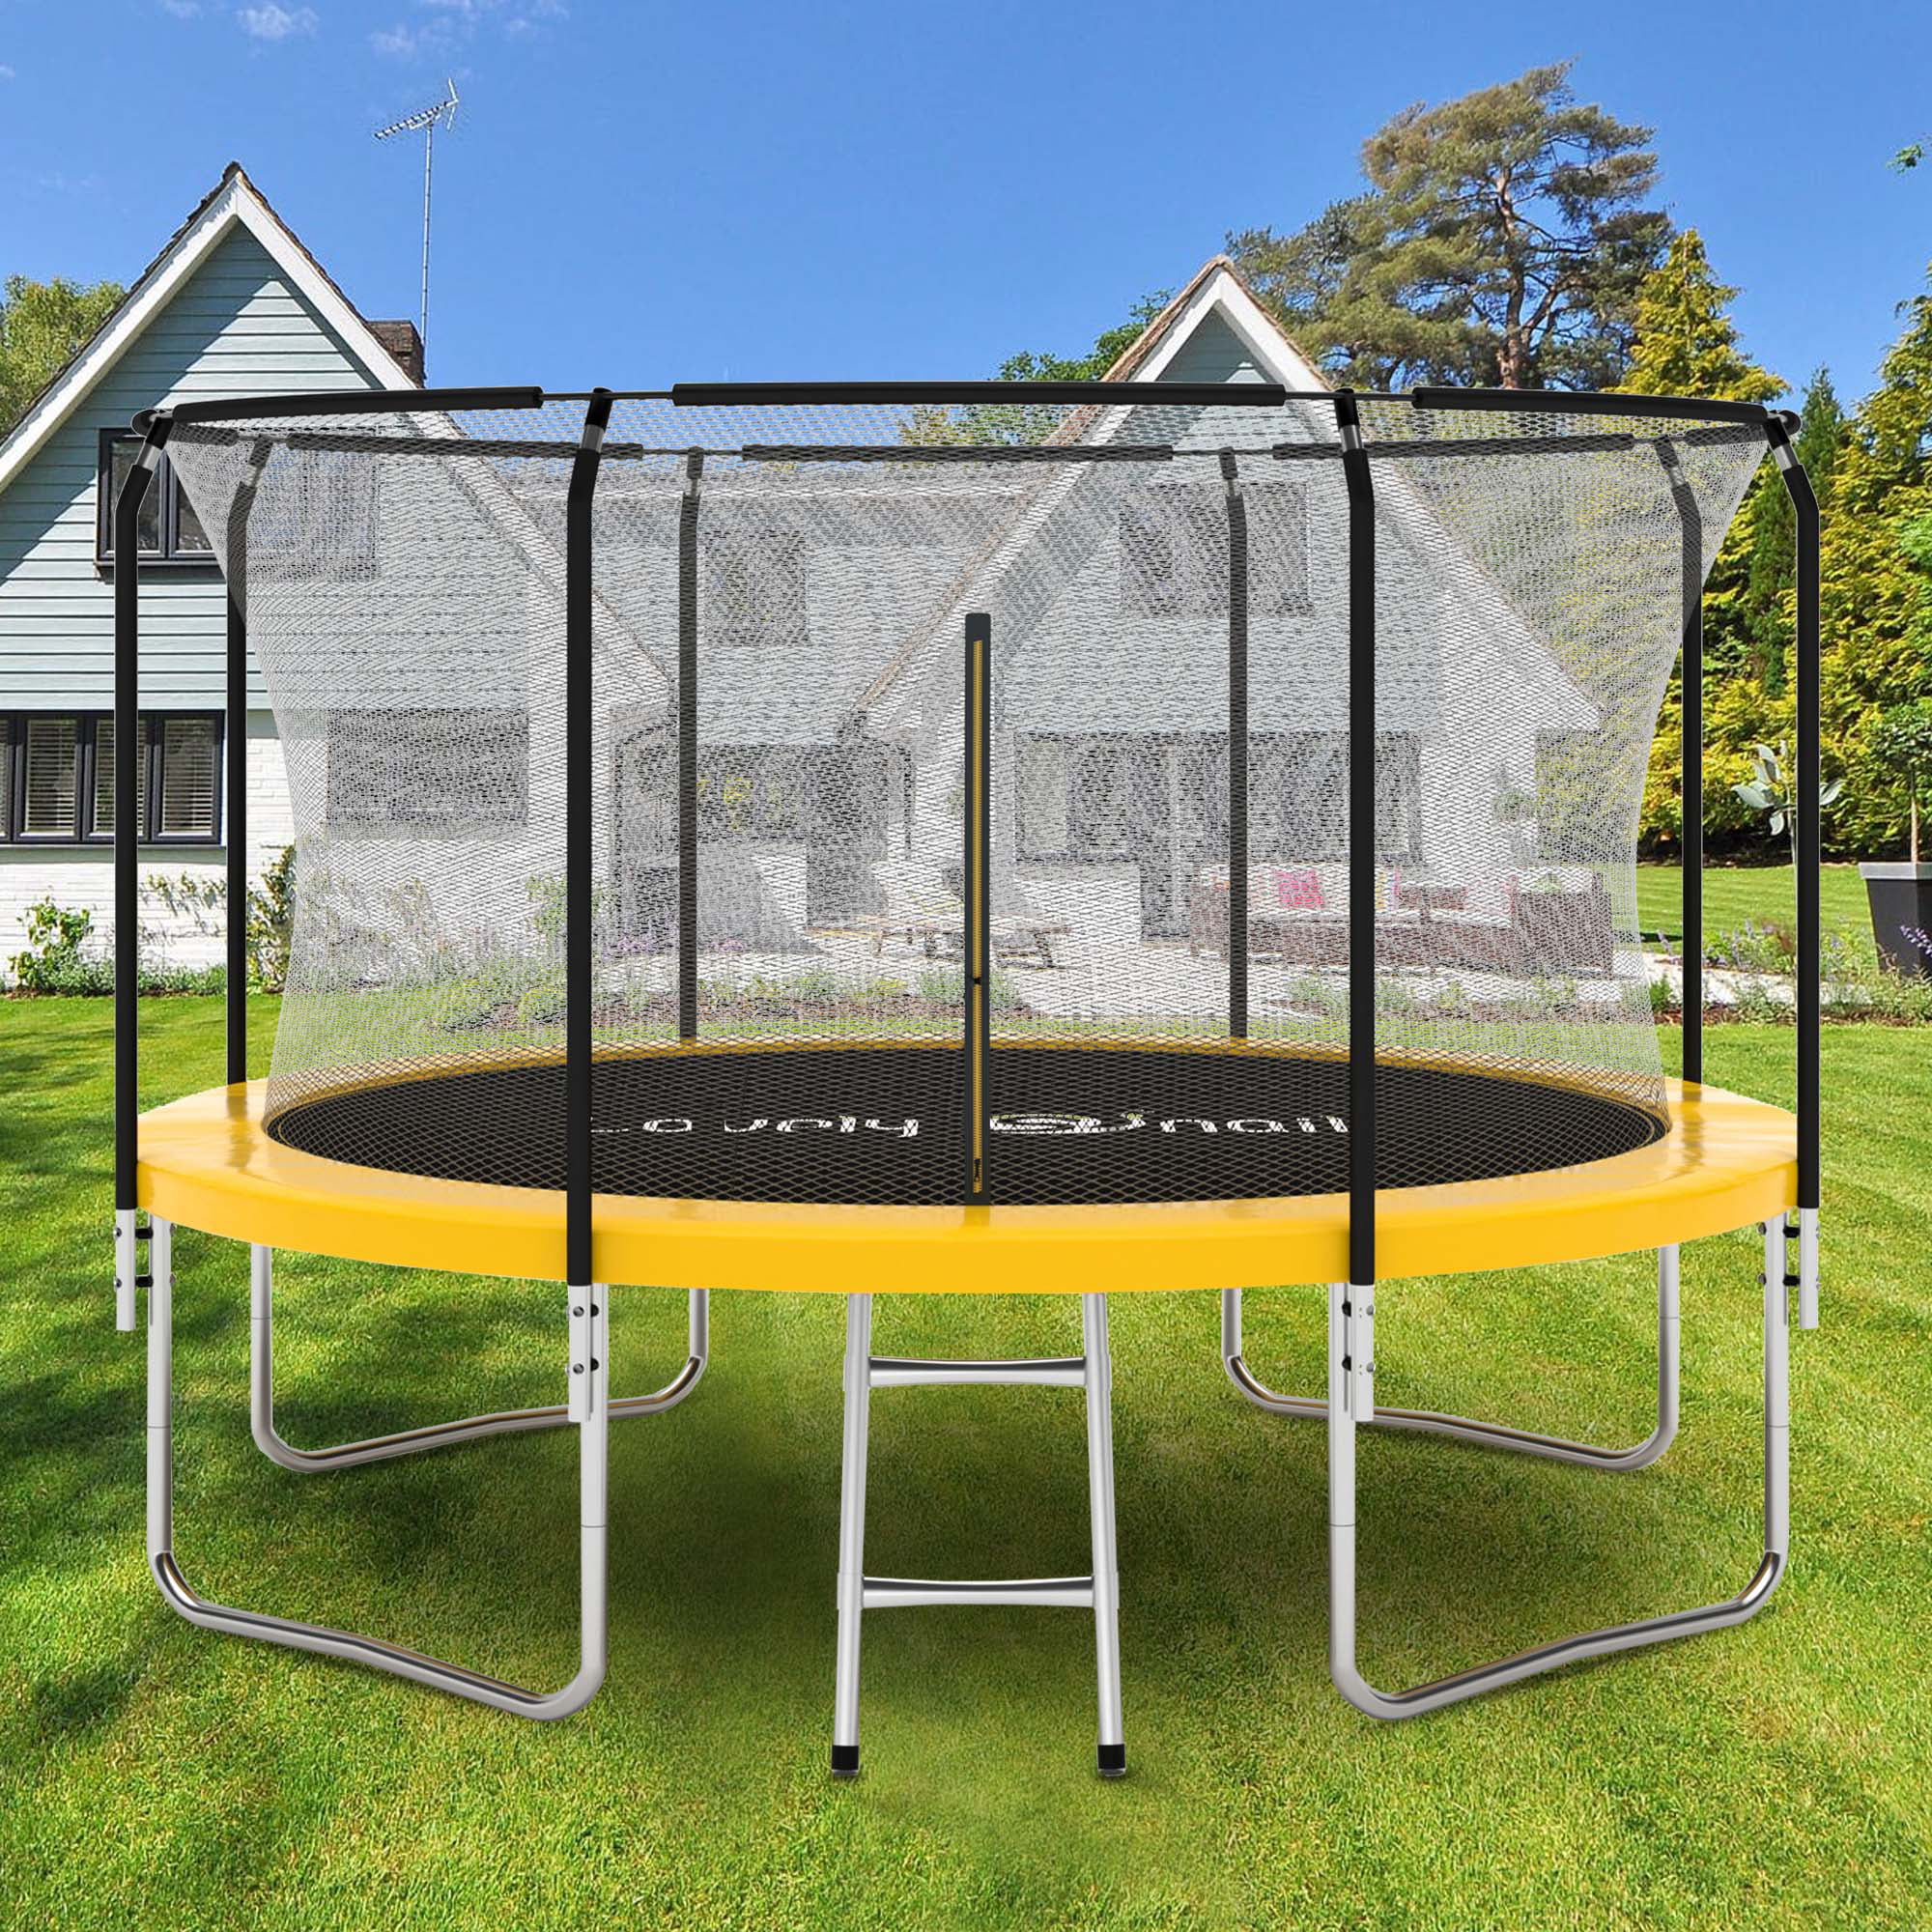 Buy 12FT Backyard Large Trampoline for Kids Adults, Recreational Trampoline diameter 366cm Online at Lowest Price Ubuy 729648975